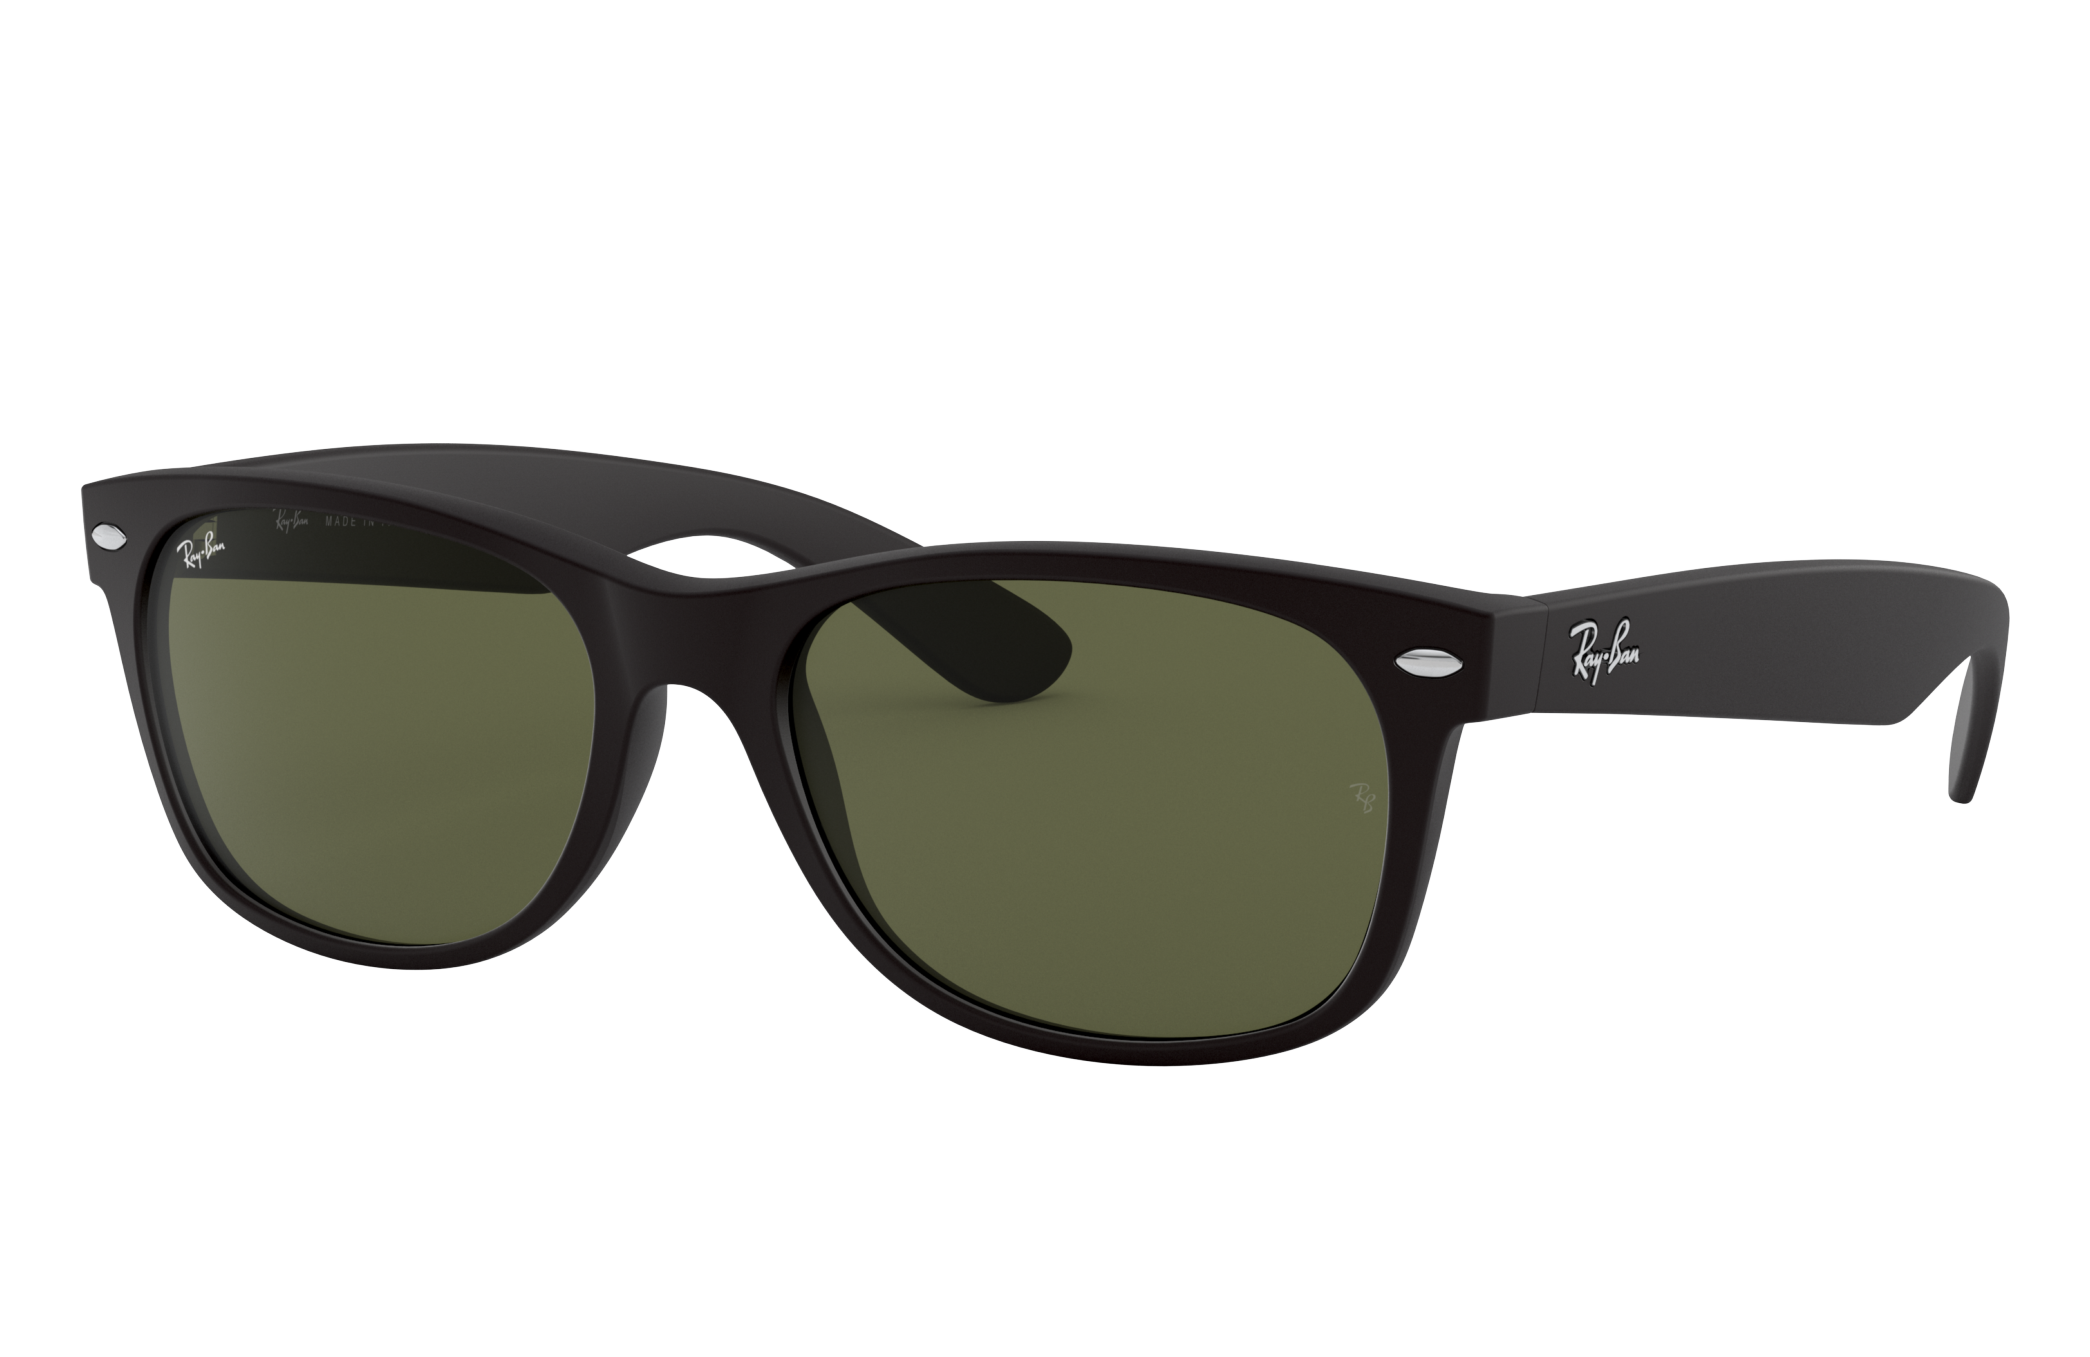 ray ban online fitting